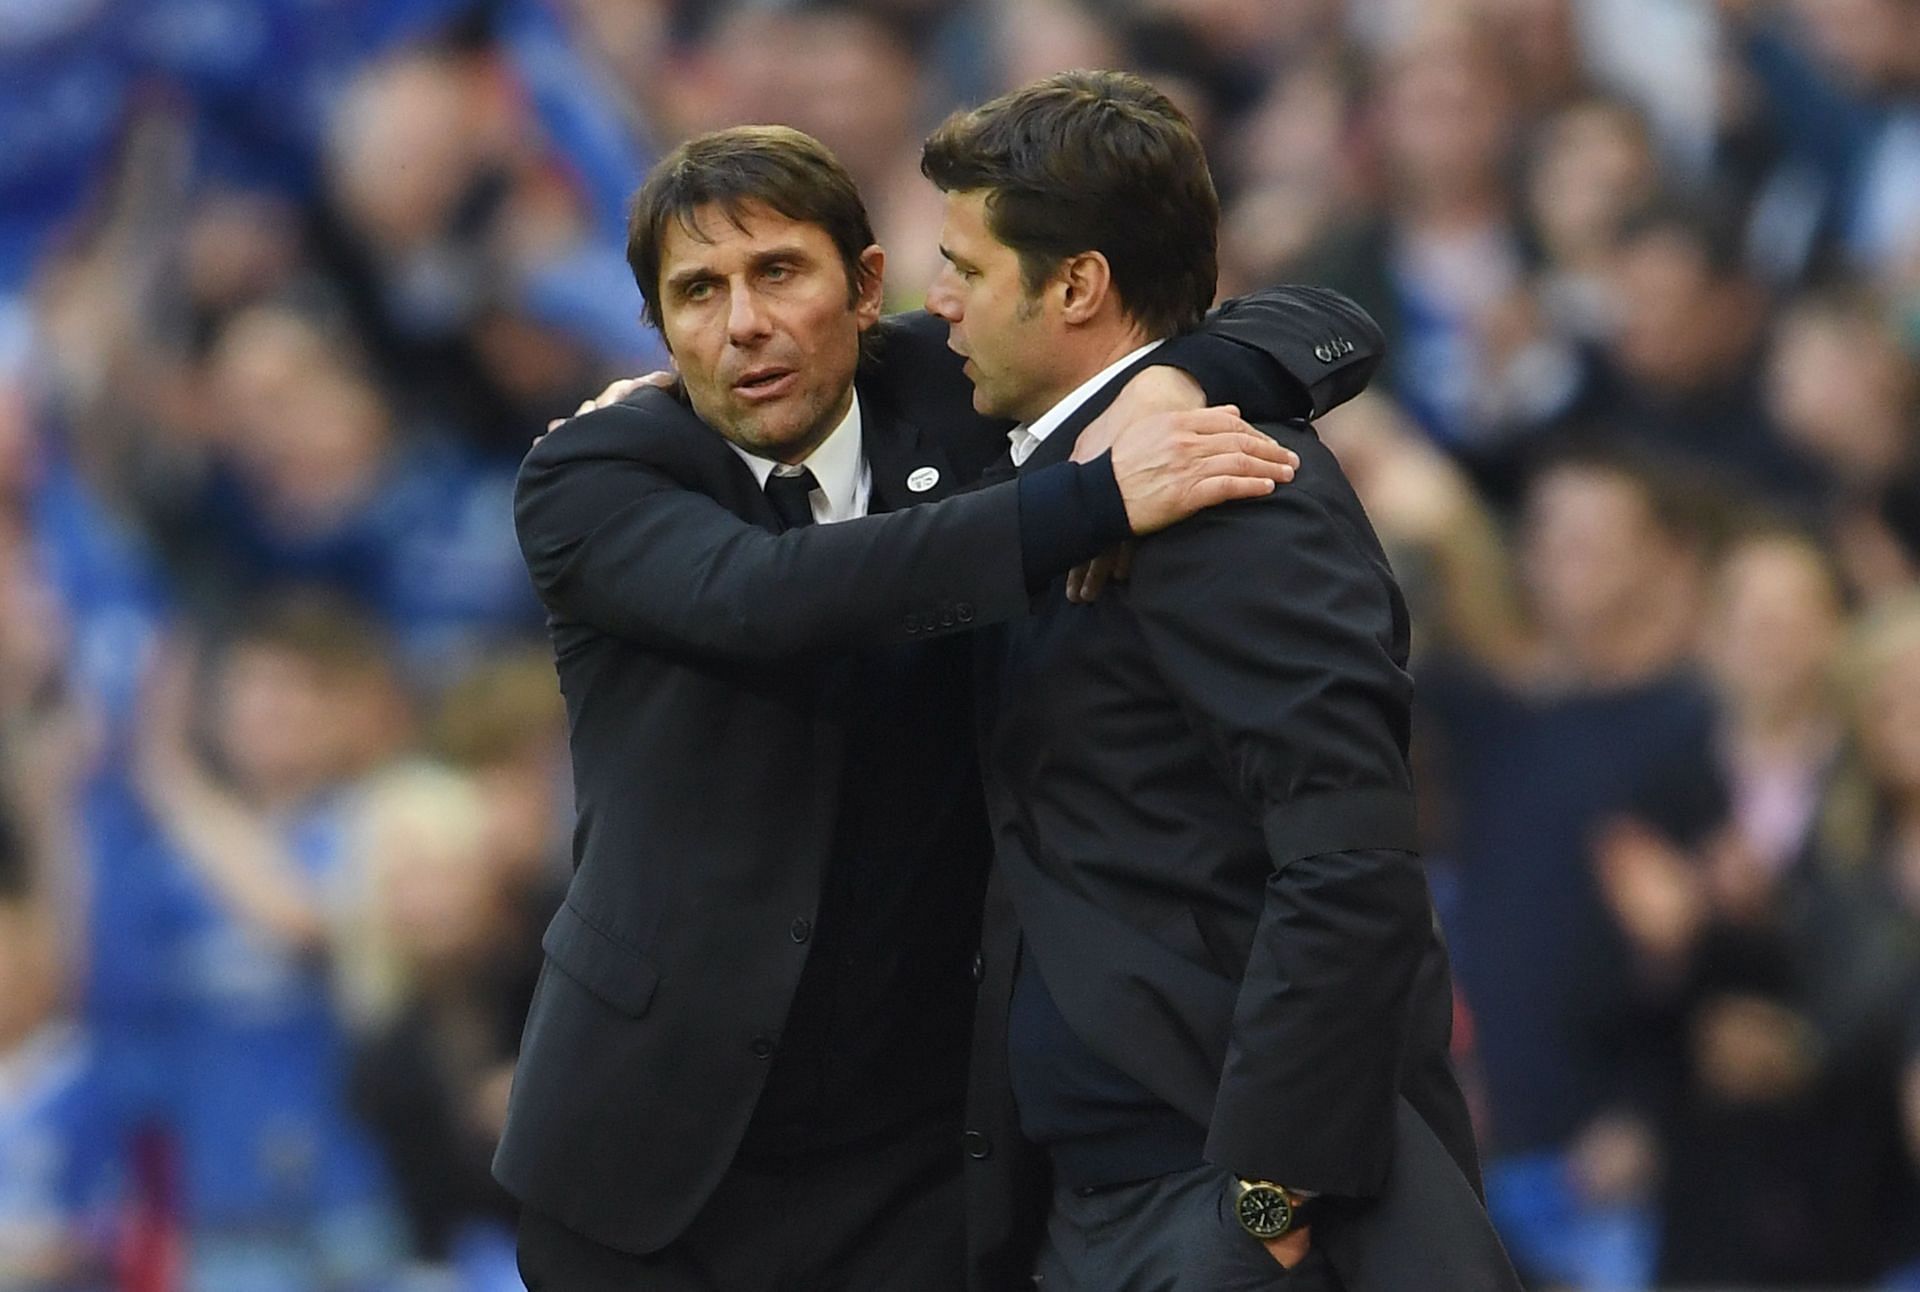 Pochettino (right) and Conte could both be on the move this summer.